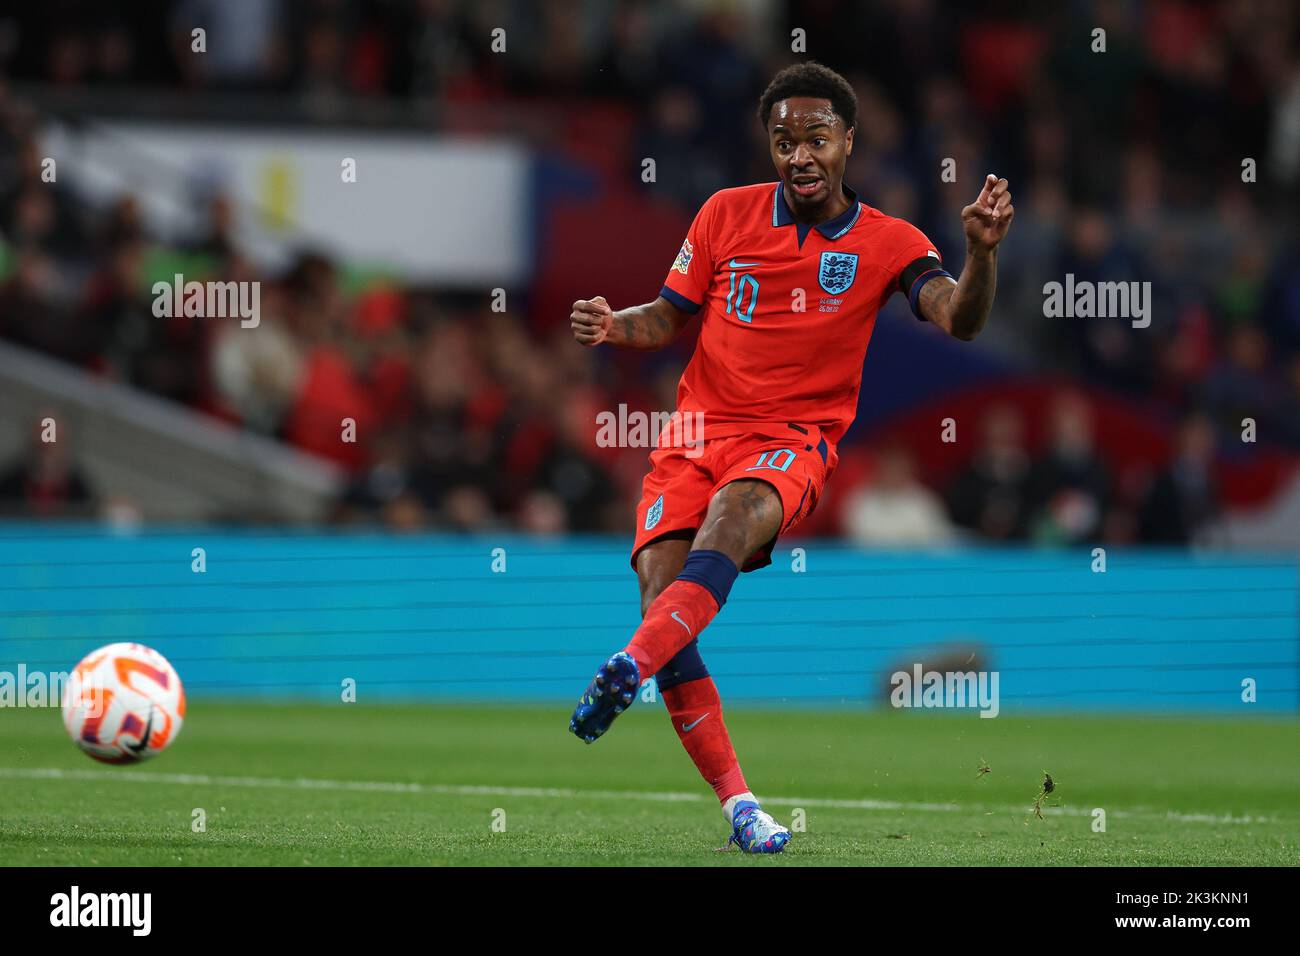 London, UK. 26th Sep, 2022. Raheem Sterling of England in action. England v Germany, UEFA Nations league International group C match at Wembley Stadium in London on Monday 26th September 2022. Editorial use only. pic by Andrew Orchard/Andrew Orchard sports photography/Alamy Live News Credit: Andrew Orchard sports photography/Alamy Live News Stock Photo